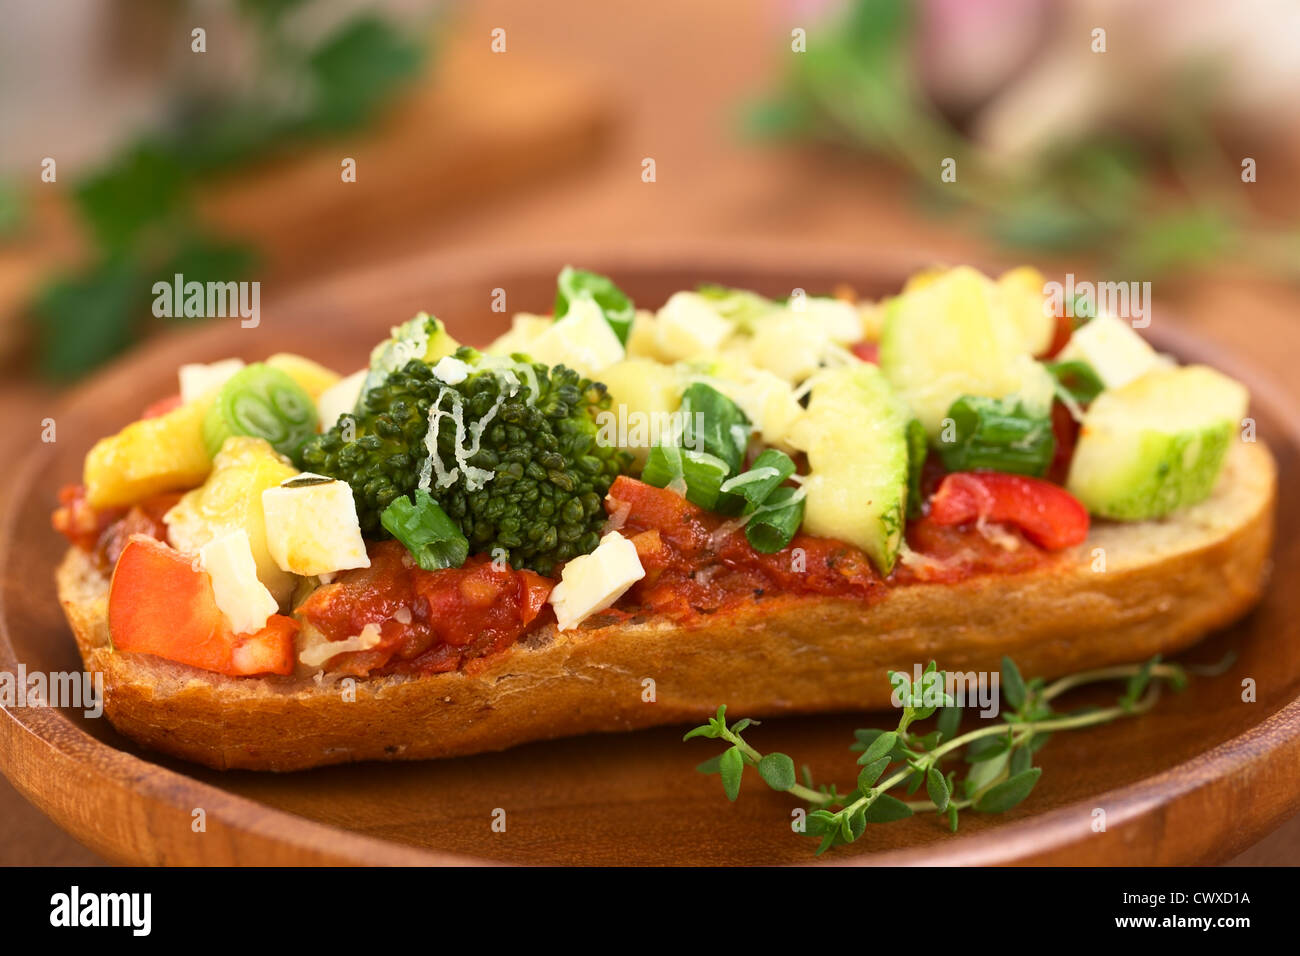 Baked vegetarian open sandwich (red bell pepper, broccoli, zucchini, scallion and cheese on spicy tomato sauce on a bun) Stock Photo